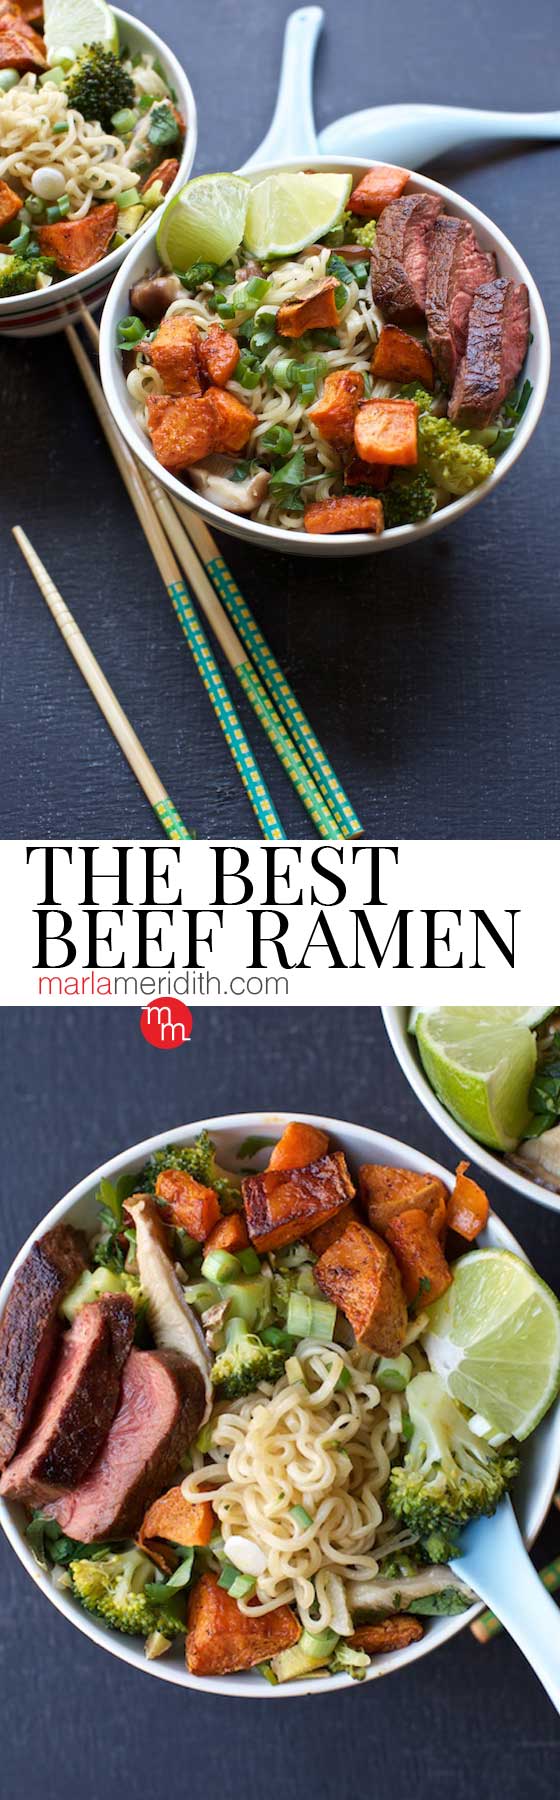 The Best Beef Ramen recipe that you will crave over & over again! MarlaMeridith.com #ramen #soup #recipe